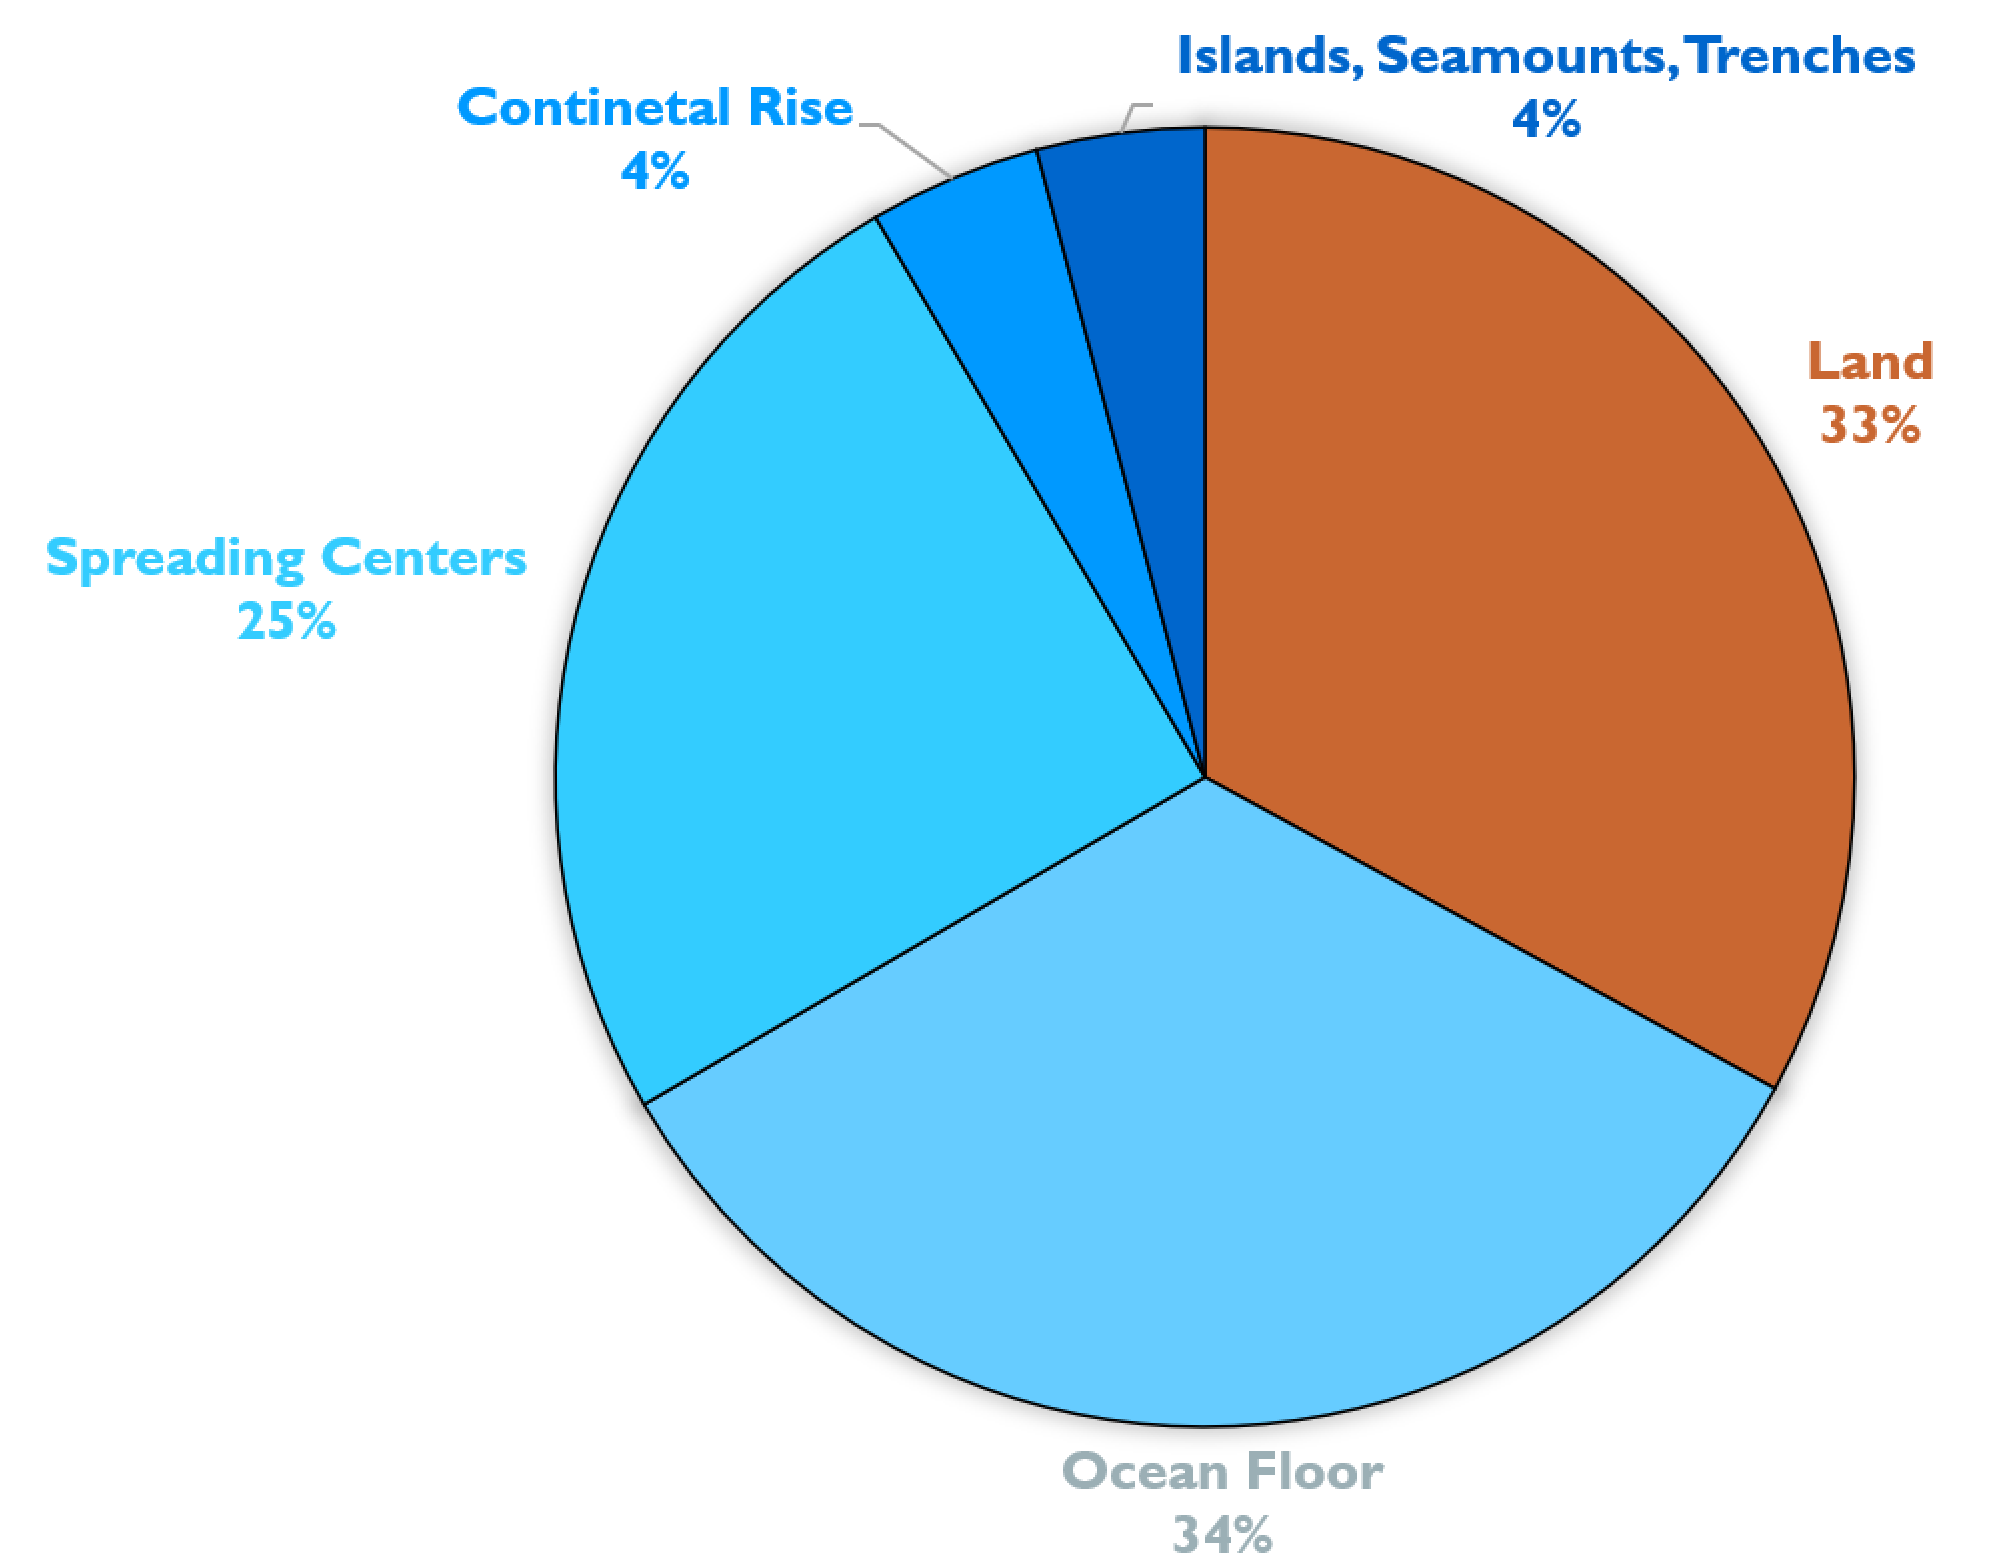 Pie chart showing the percentages of the features of the oceans:  Land (33%), Ocean Floor (34%), Spreading Centers (25%), Continental Rise (4%), Islands, seamounts, trenches (4%).